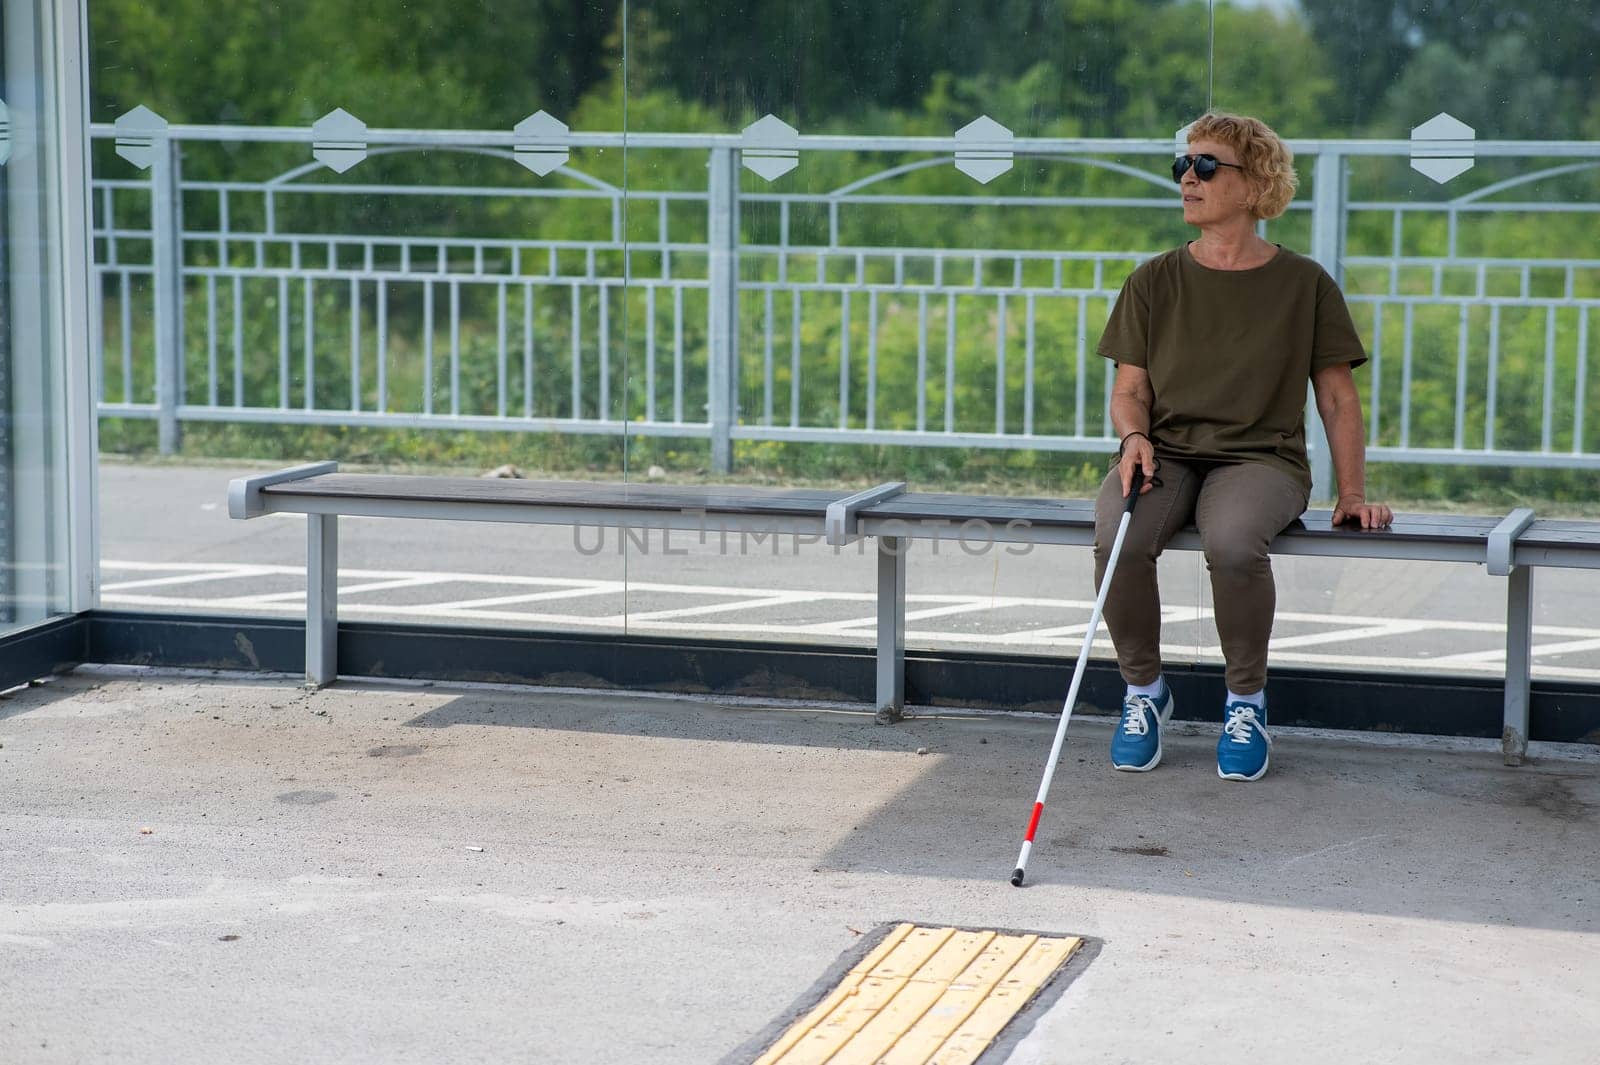 An elderly blind woman is waiting for transport at a bus stop. by mrwed54